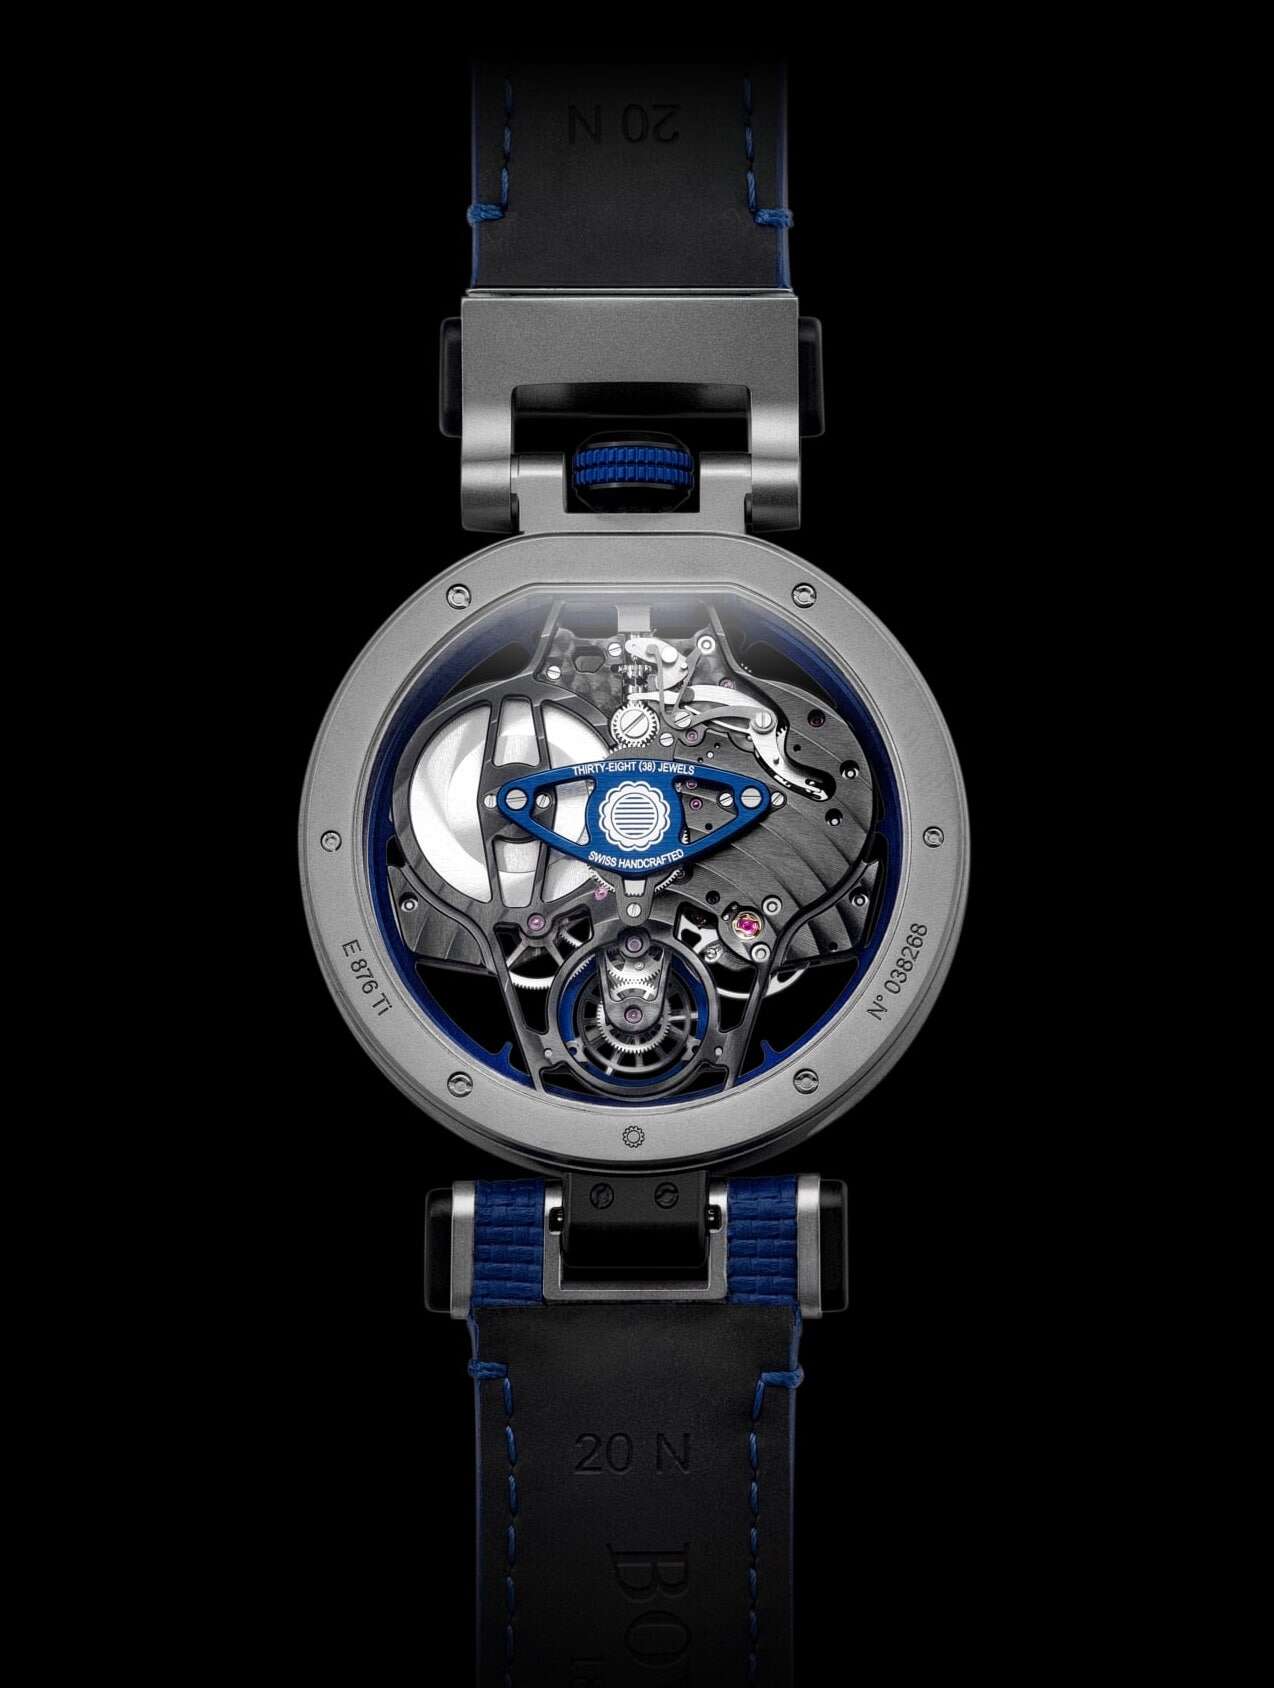 Image of the back of the Aperto 1 which shows the exposed skeleton mechanics of the watch. 